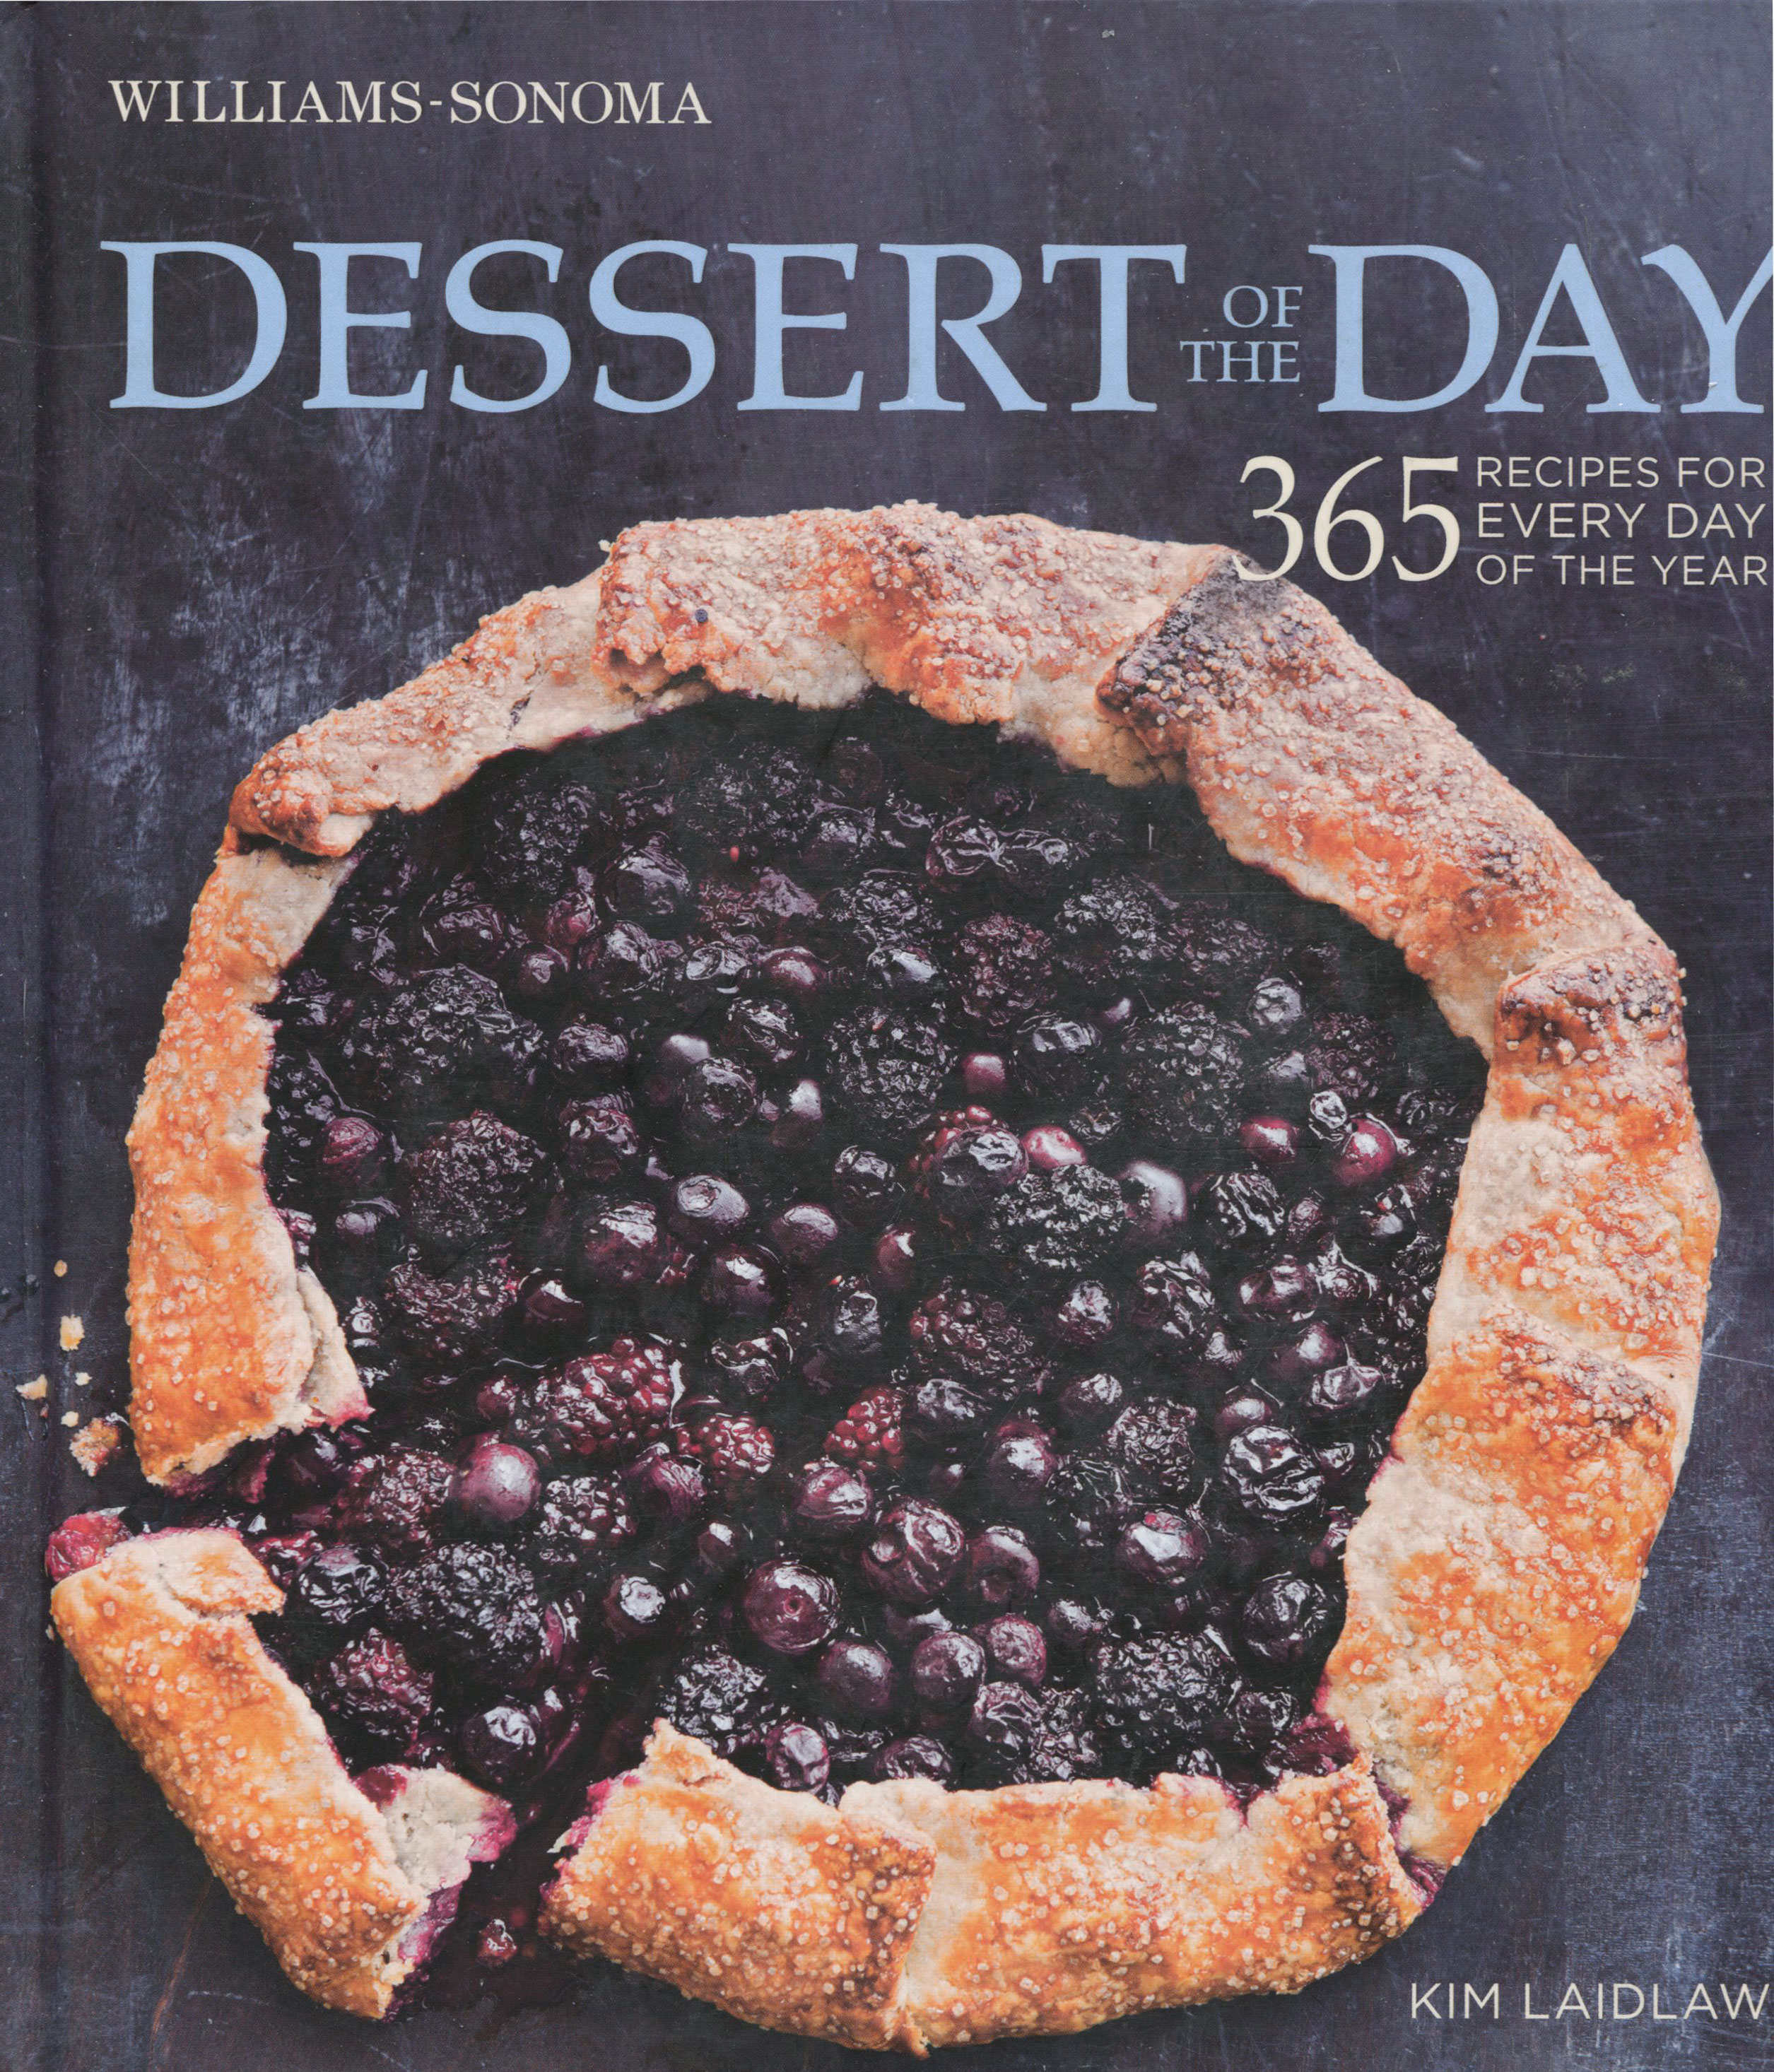 TBT Cookbook Review: Dessert of the Day by Kim Laidlaw